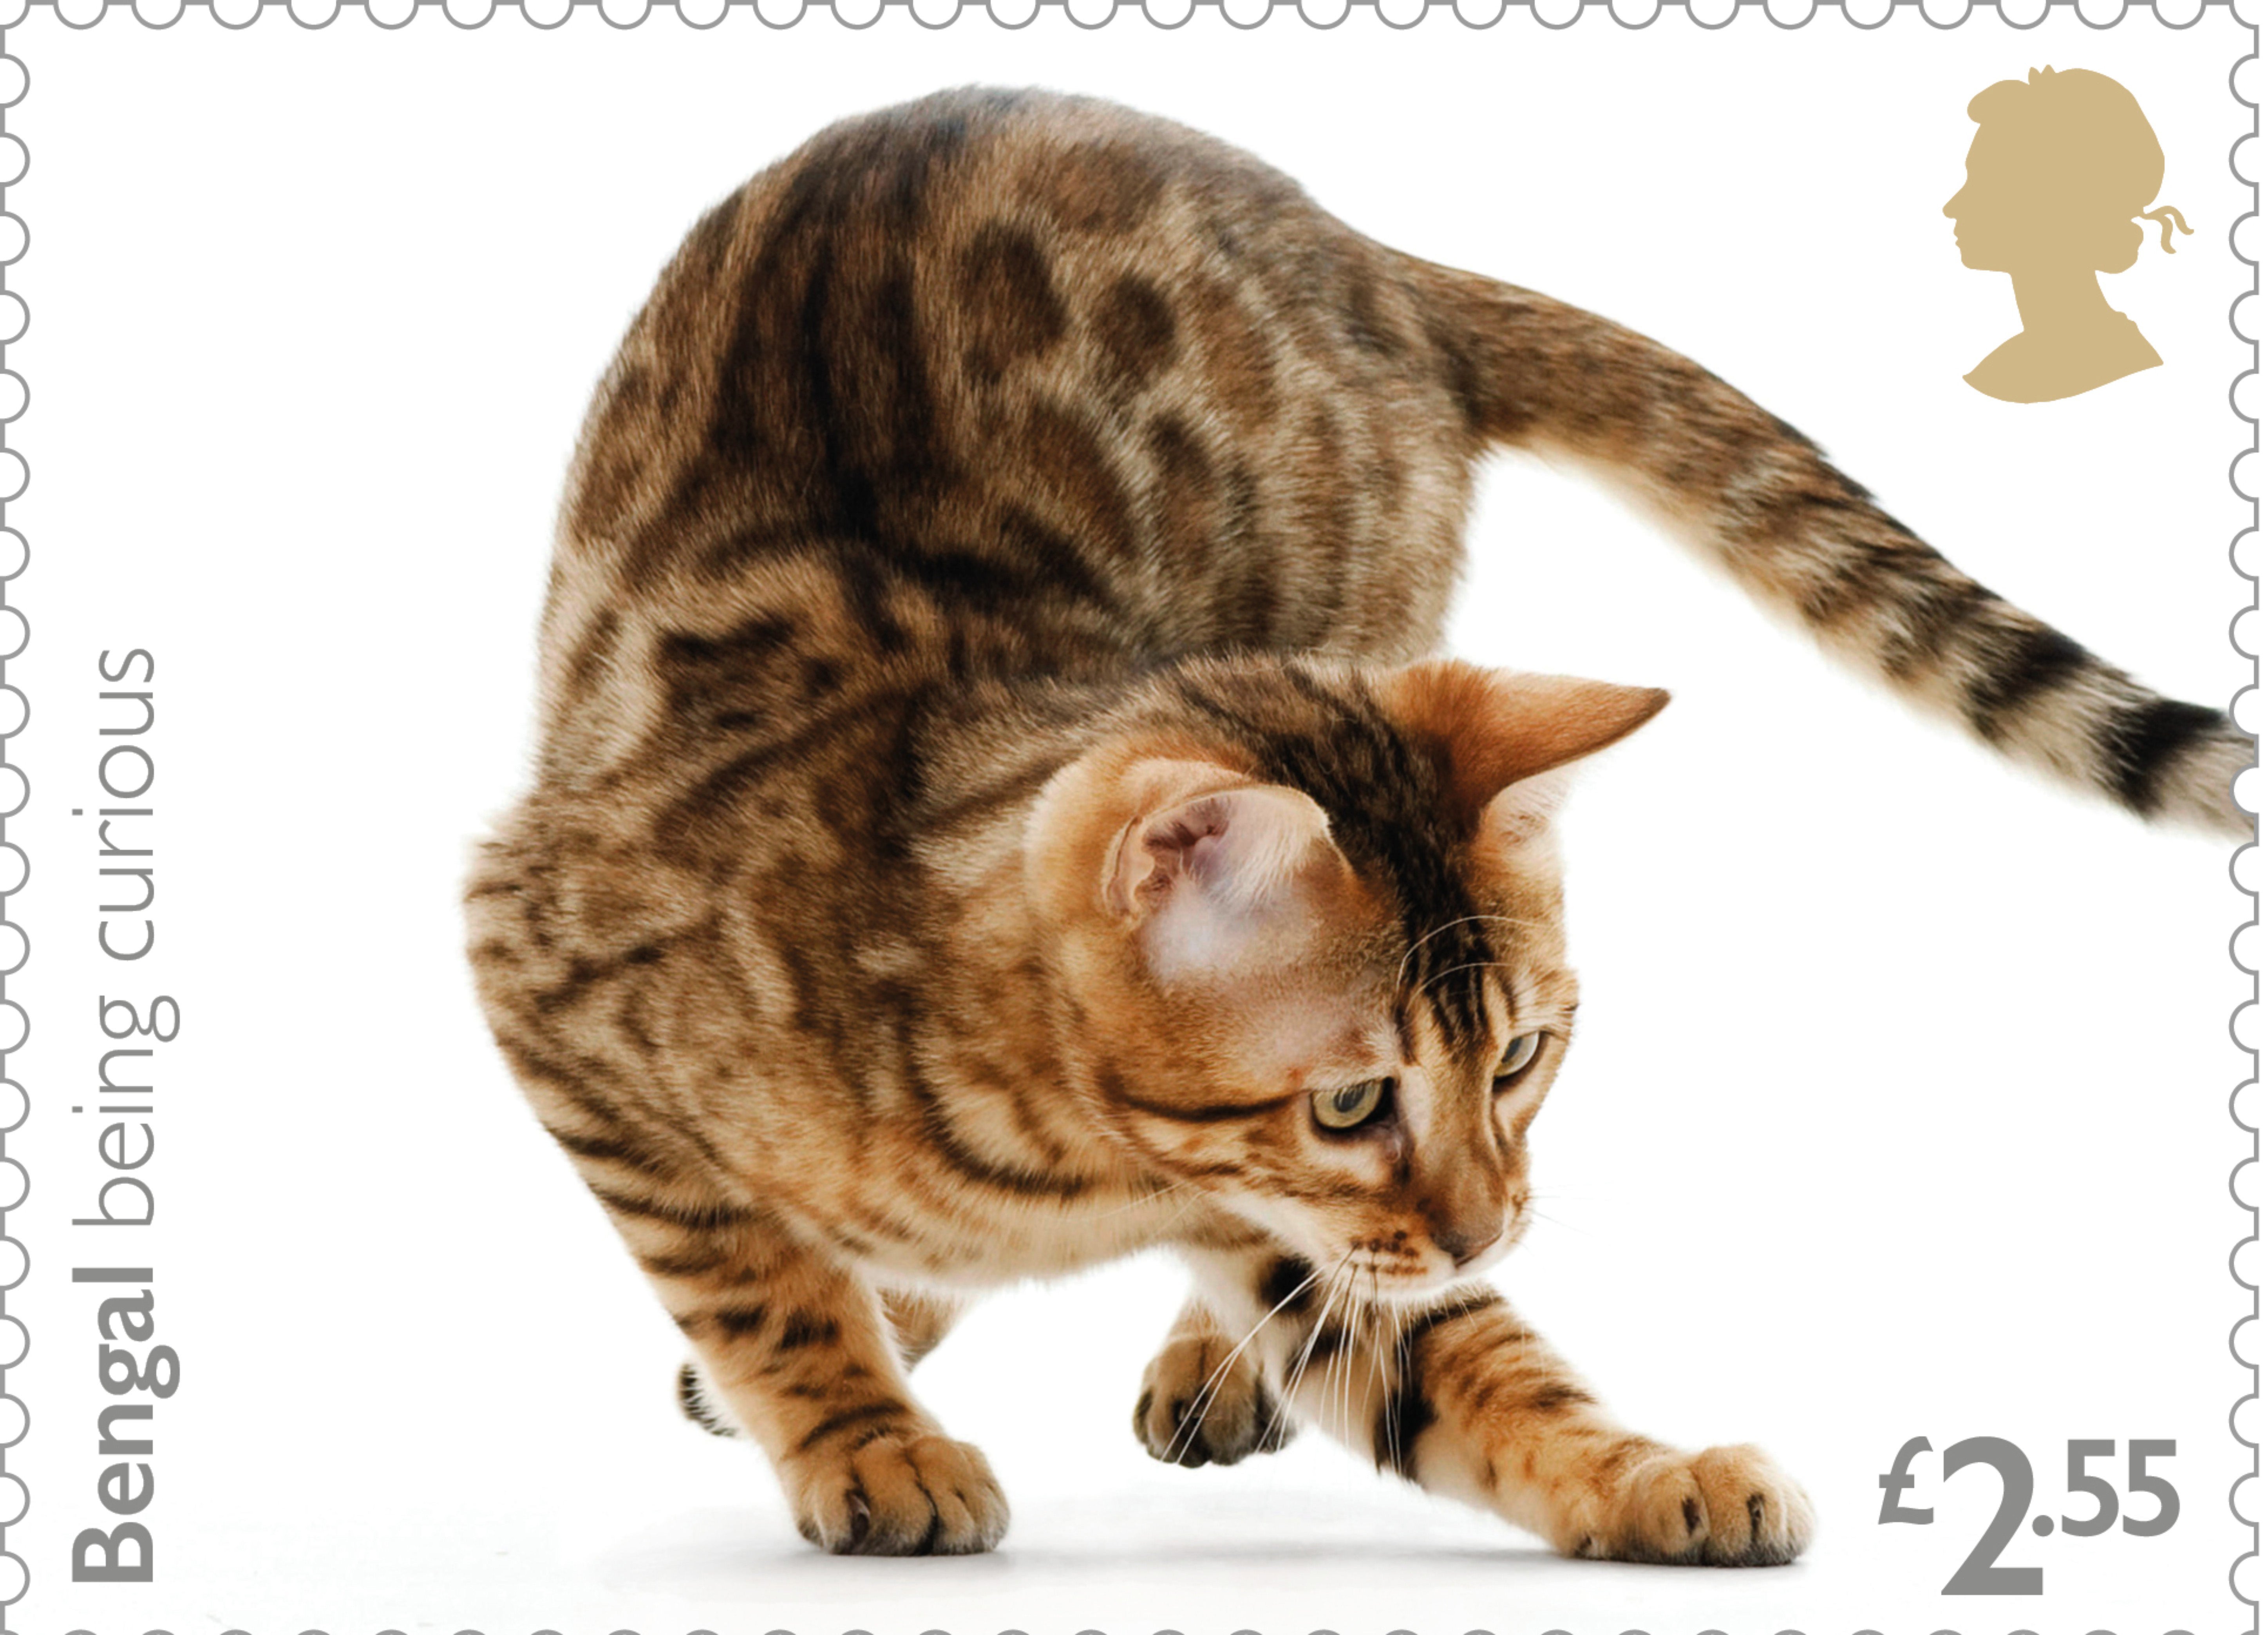 A new set of stamps features cats (Royal Mail/PA)